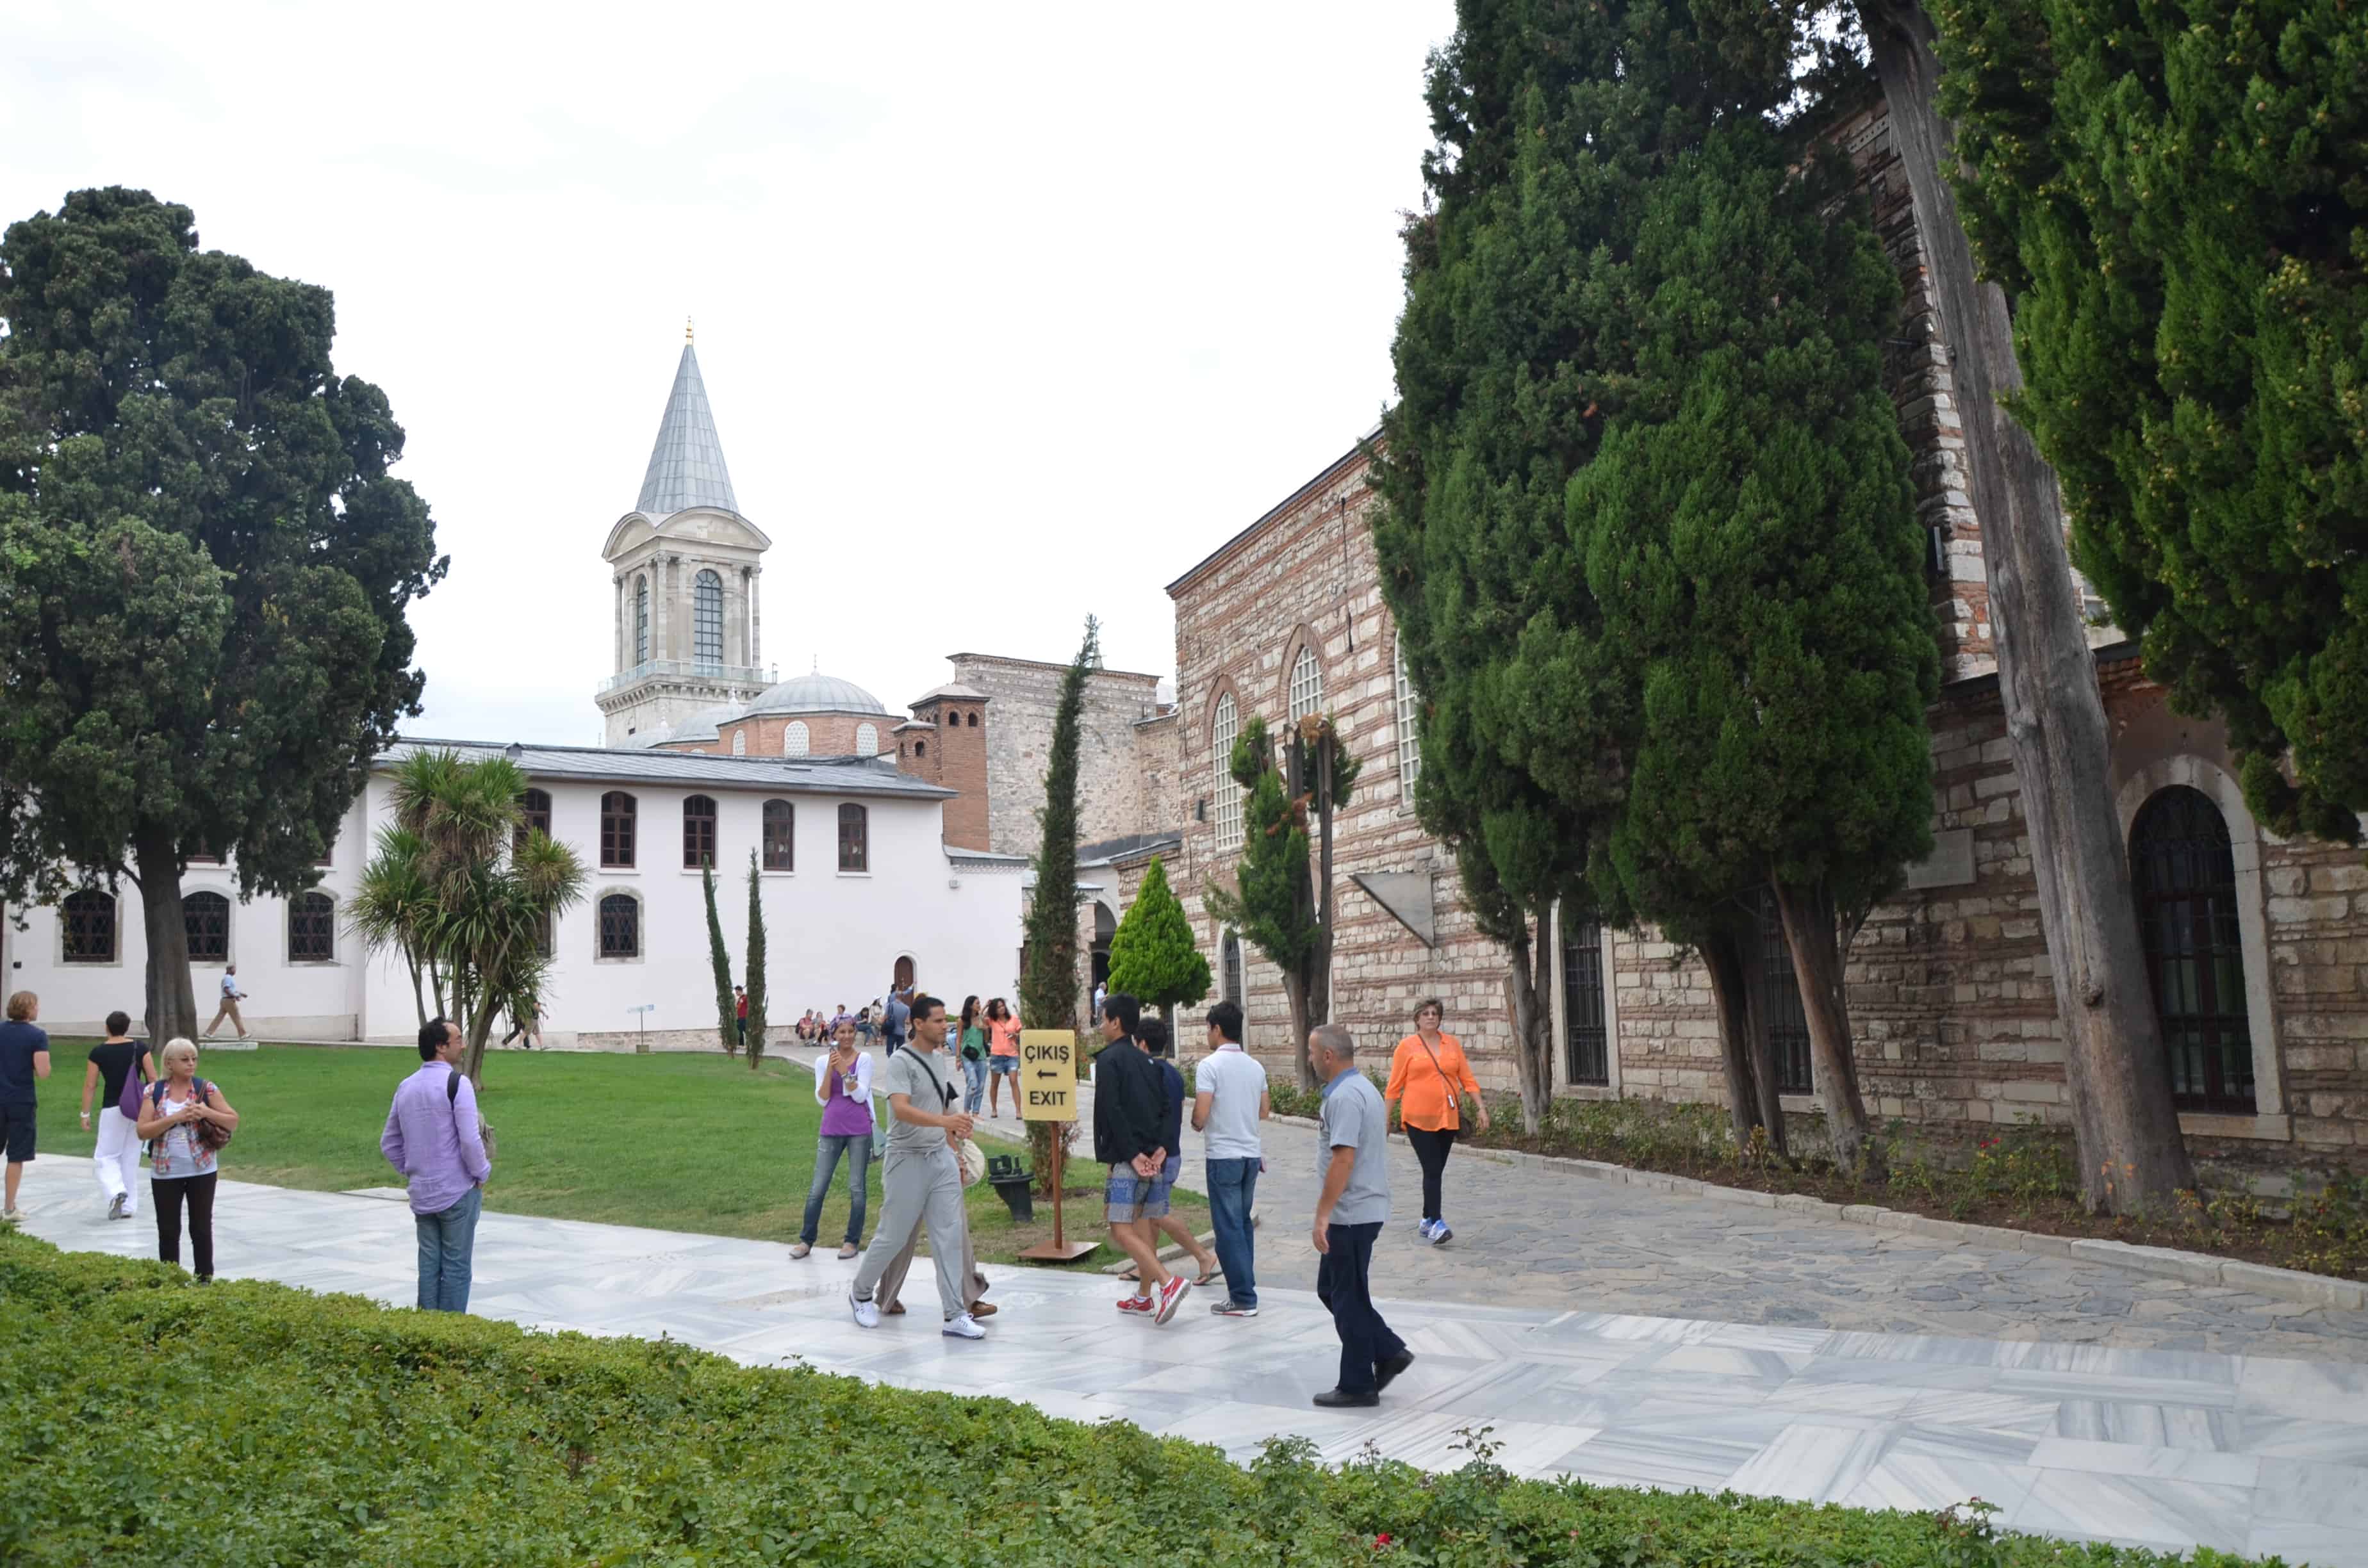 3rd Courtyard at Topkapi Palace in Istanbul, Turkey